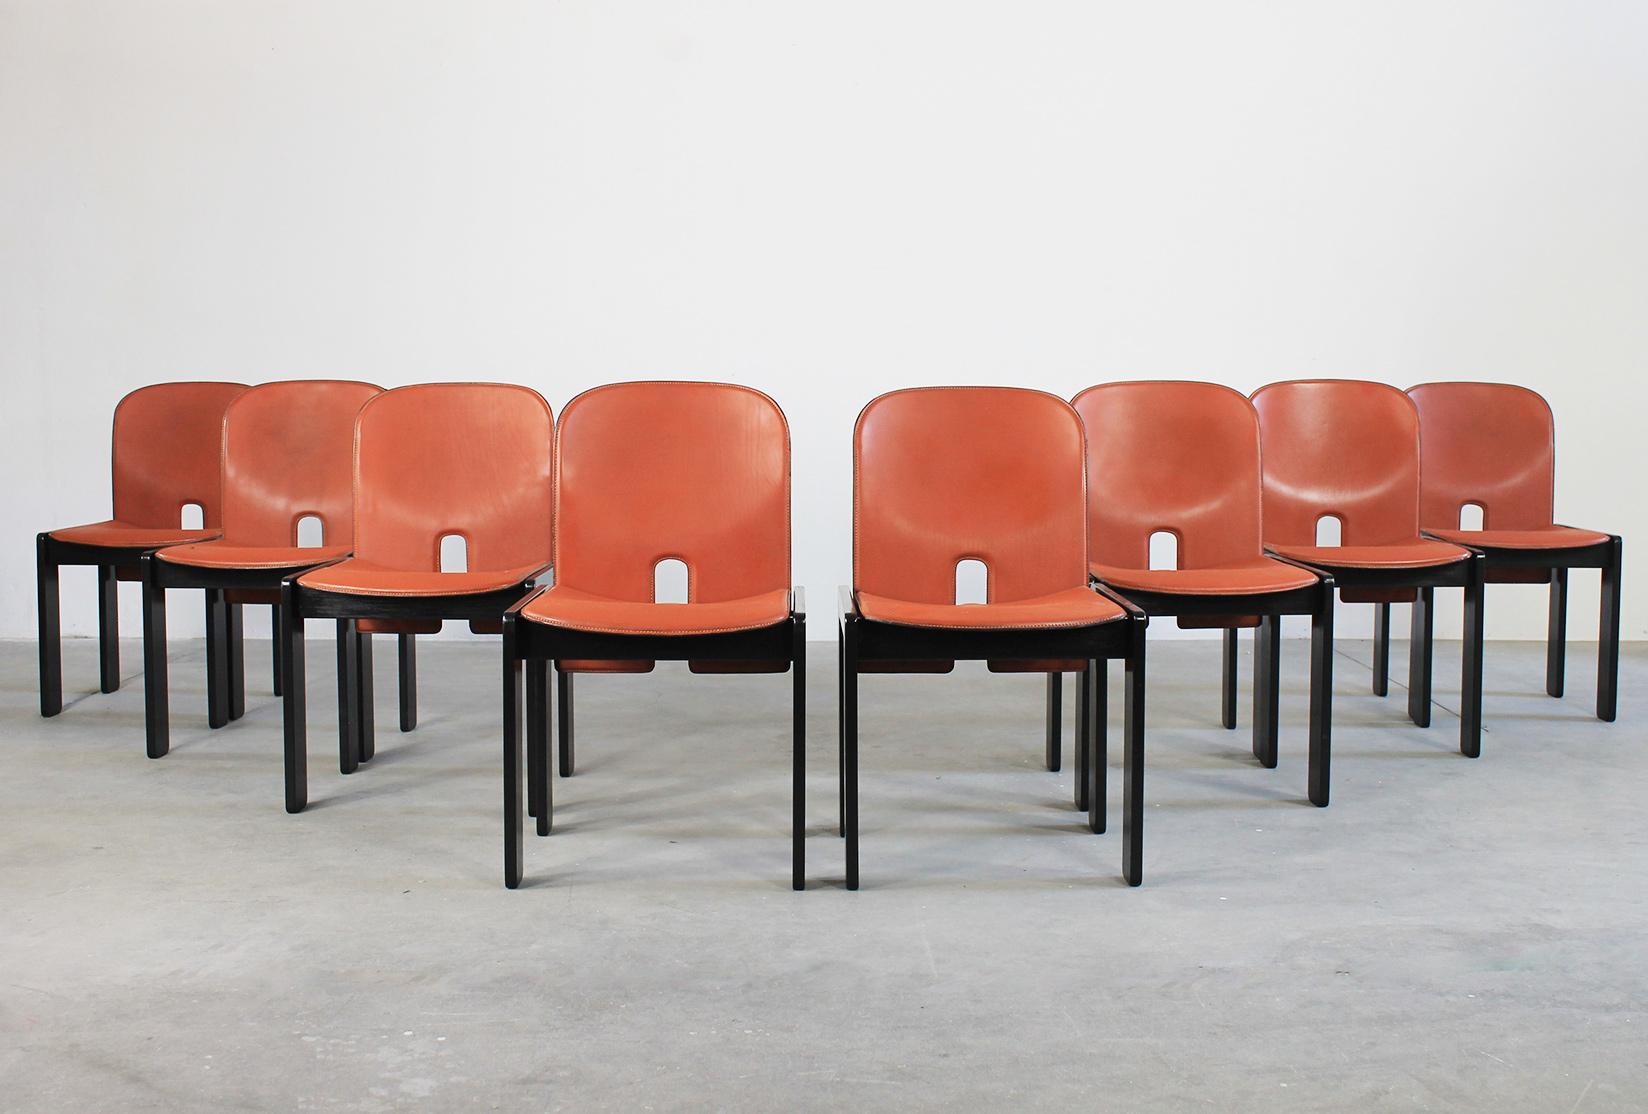 Set of eight 121 chairs with structure in black lacquered wood, seat and back in leather designed by Tobia and Afra Scarpa and manufactured by Cassina in 1965.

A few chairs present the original Cassina's label under the seat.

Tobia Scarpa and his